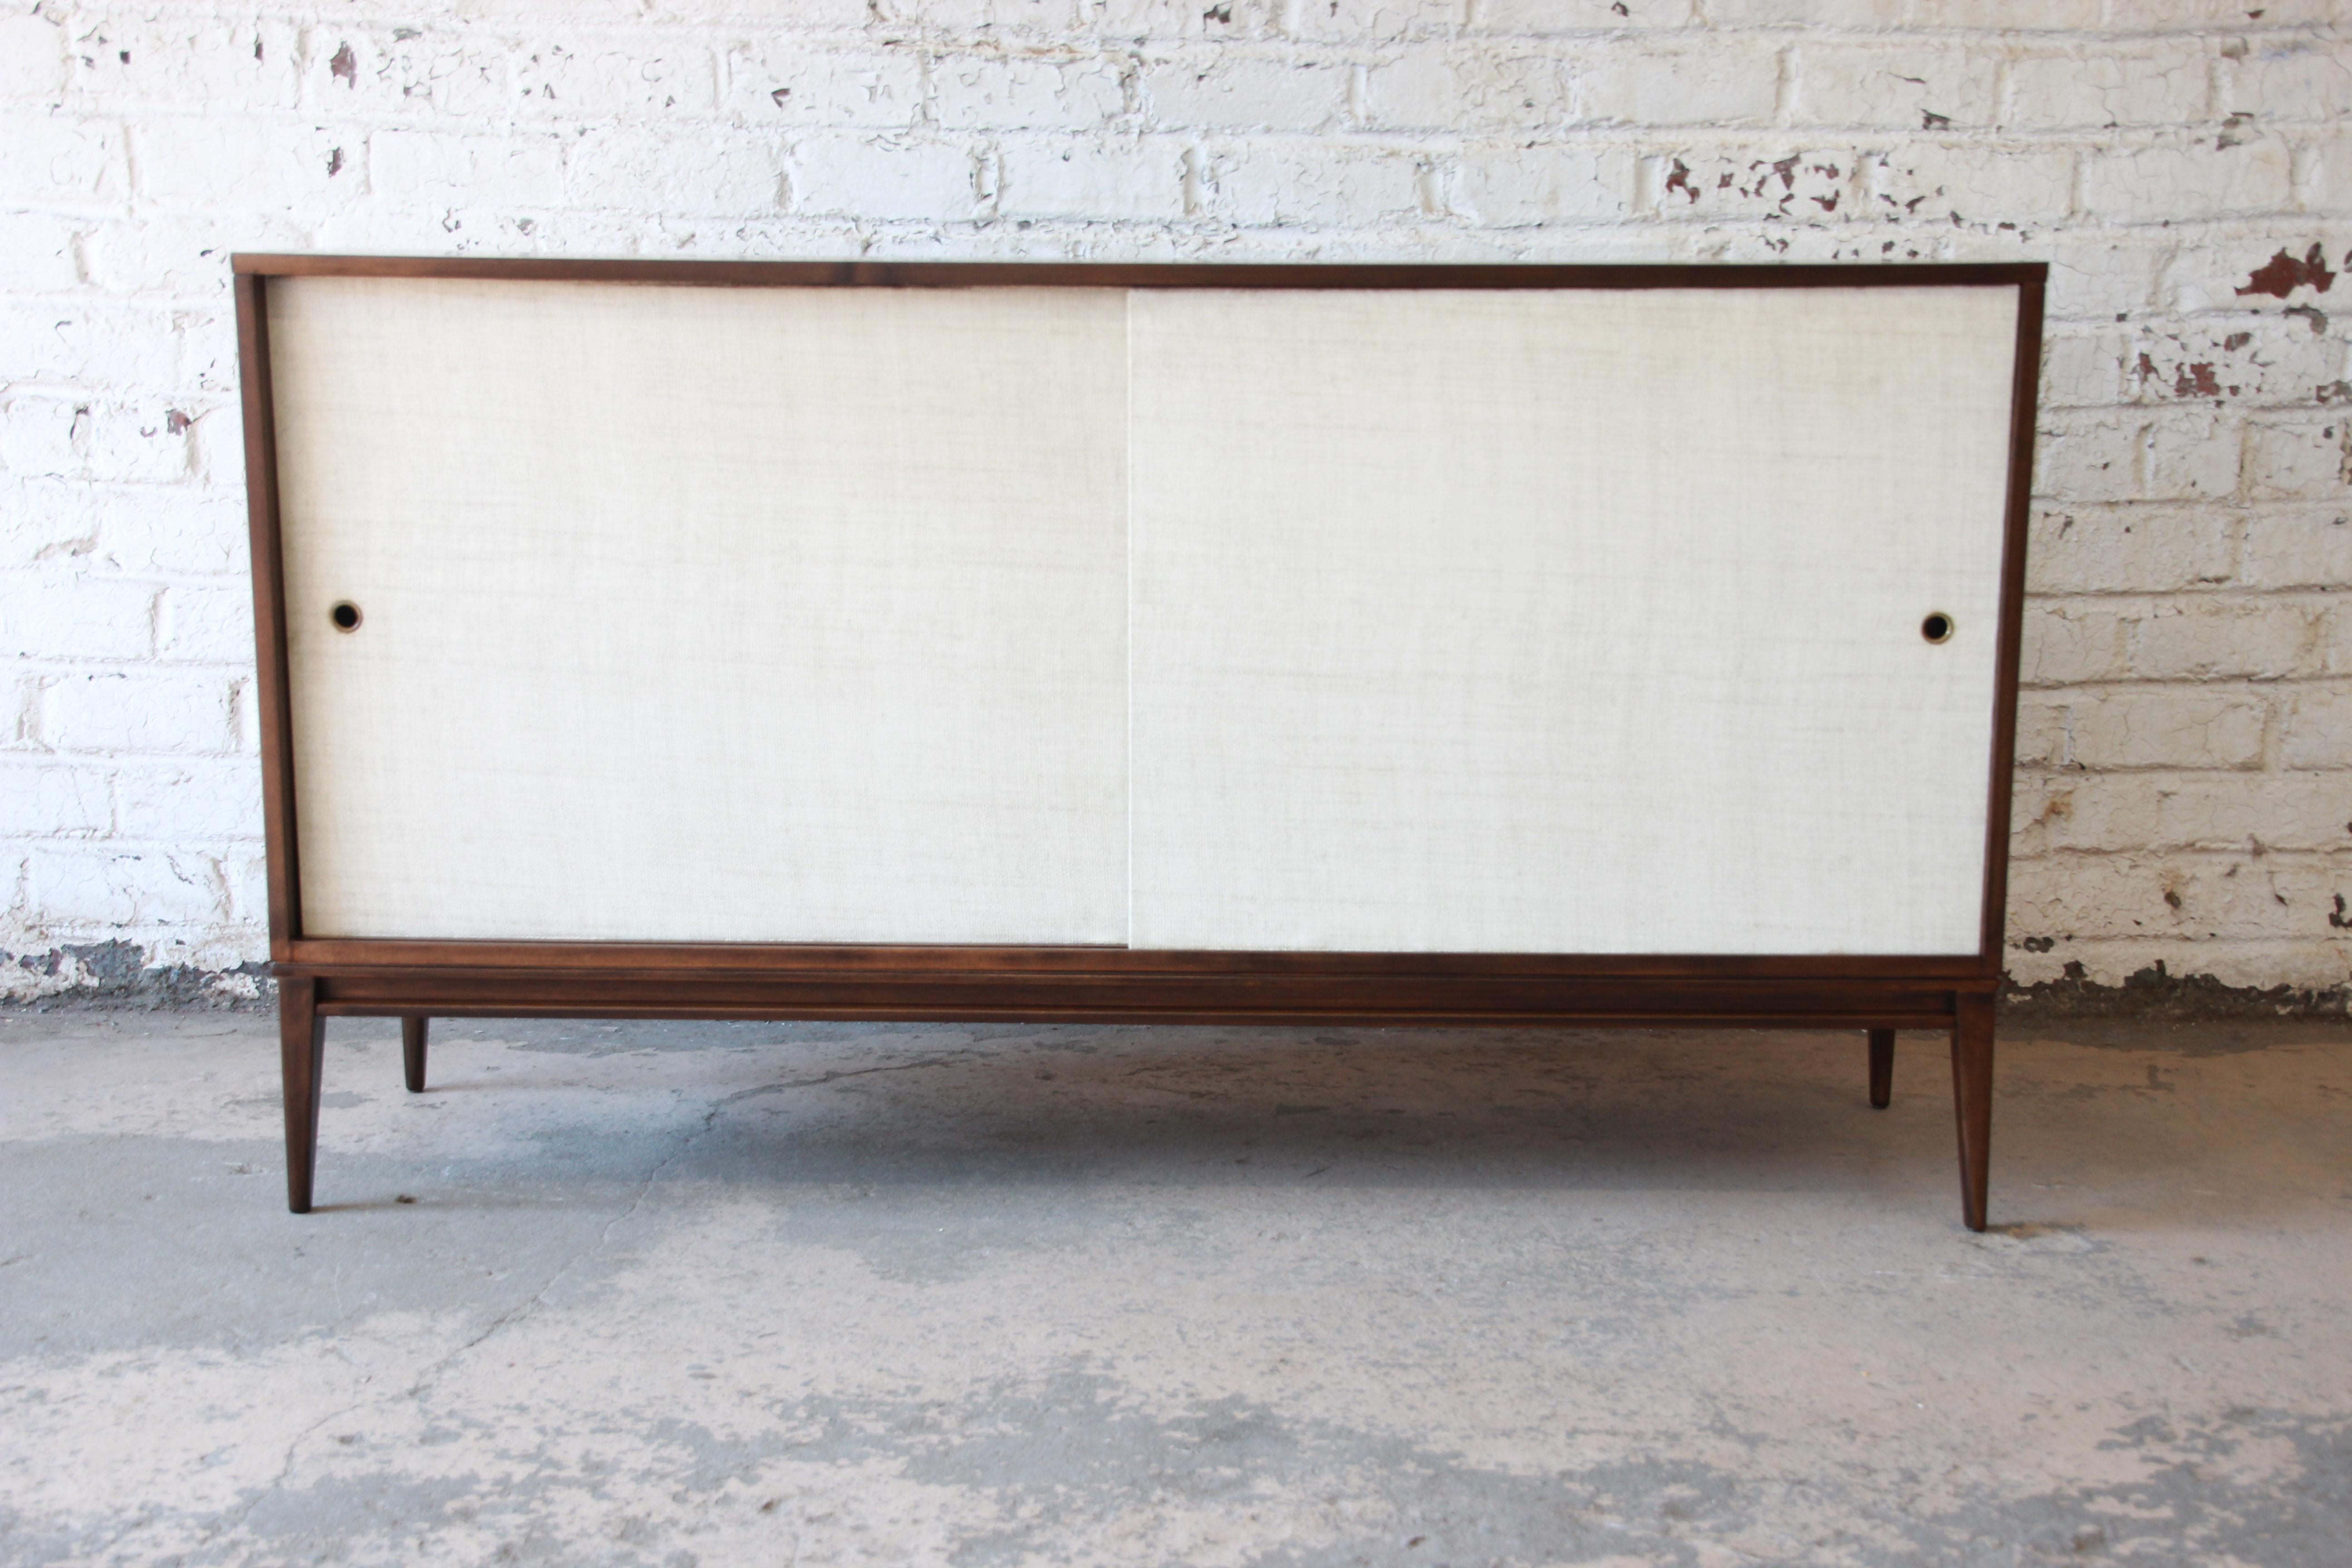 An exceptional Mid-Century Modern sideboard credenza from the iconic Planner Group line by Paul McCobb for Winchendon Furniture. The sideboard is made from solid birch and has two white grasscloth sliding cabinet doors. The left door opens up to a